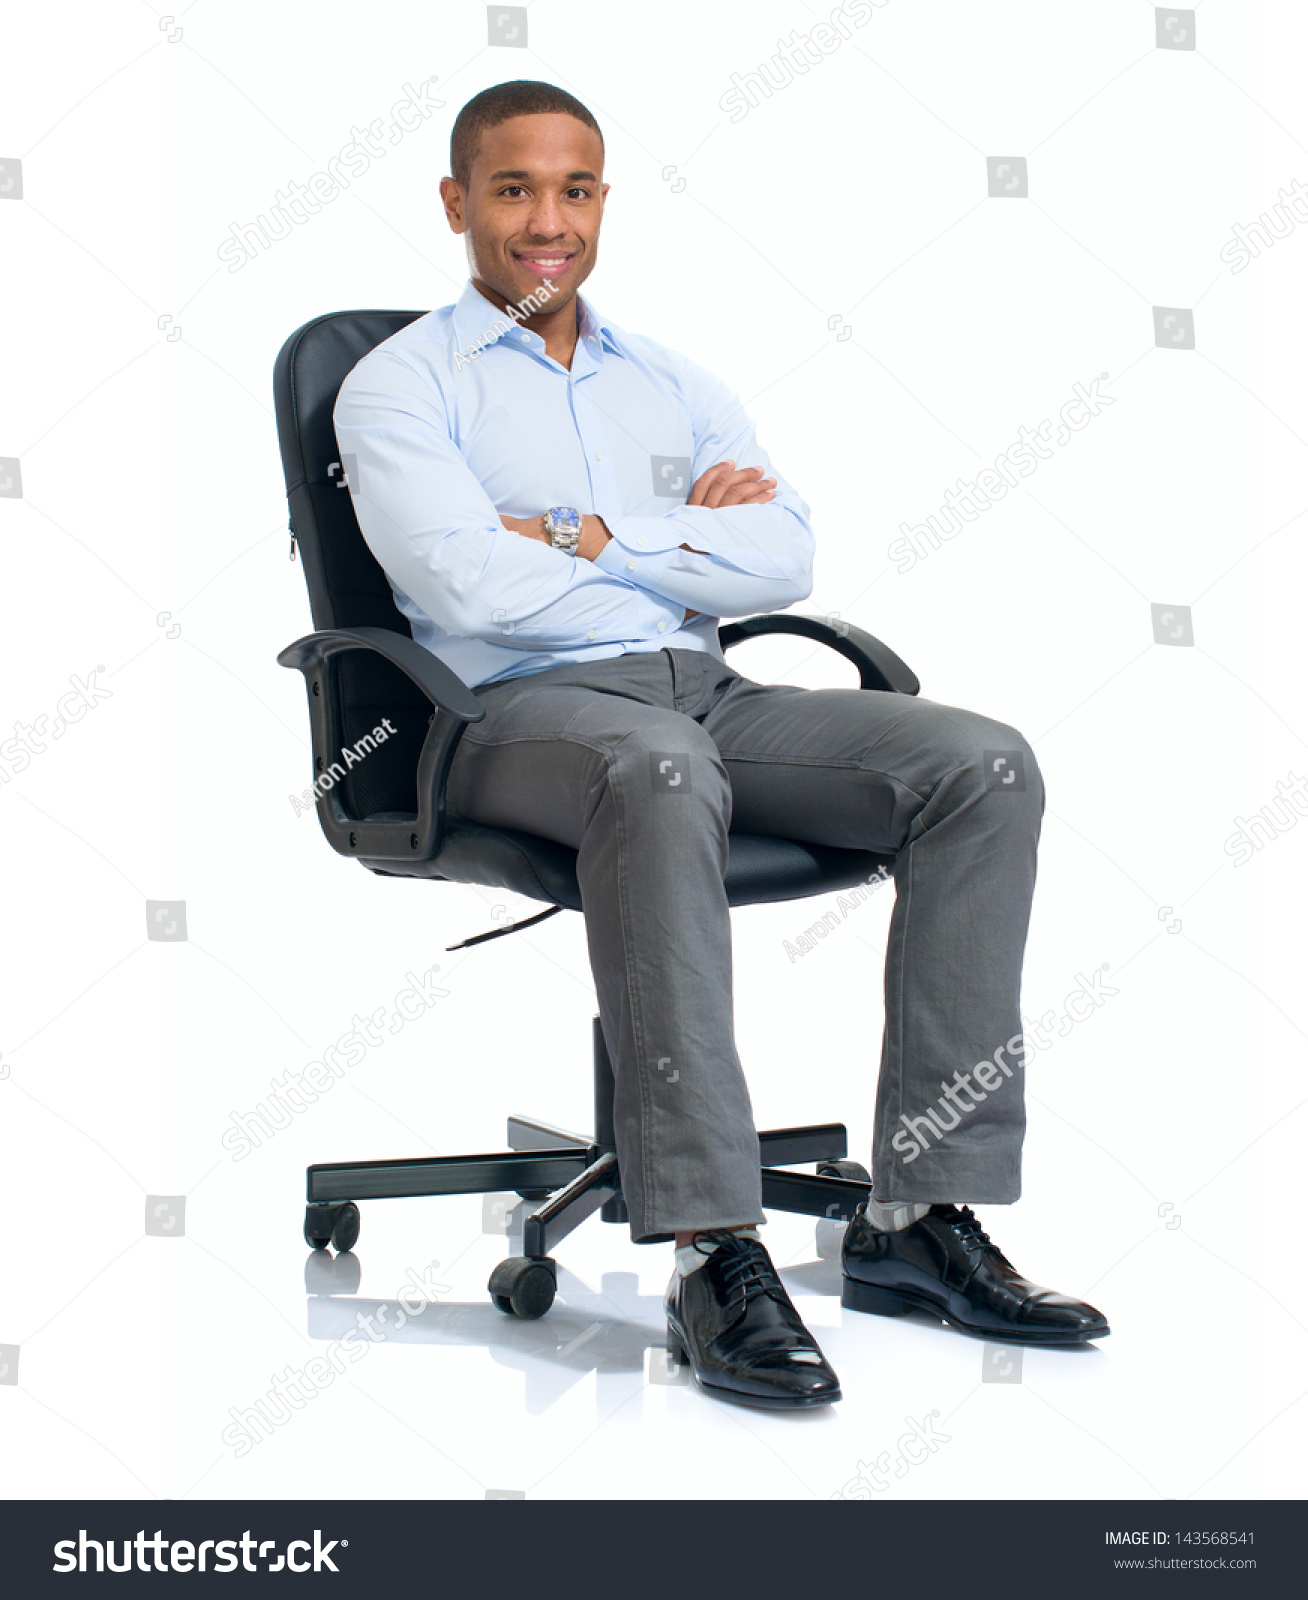 stock-photo-young-african-businessman-sitting-on-chair-over-white-background-143568541.jpg